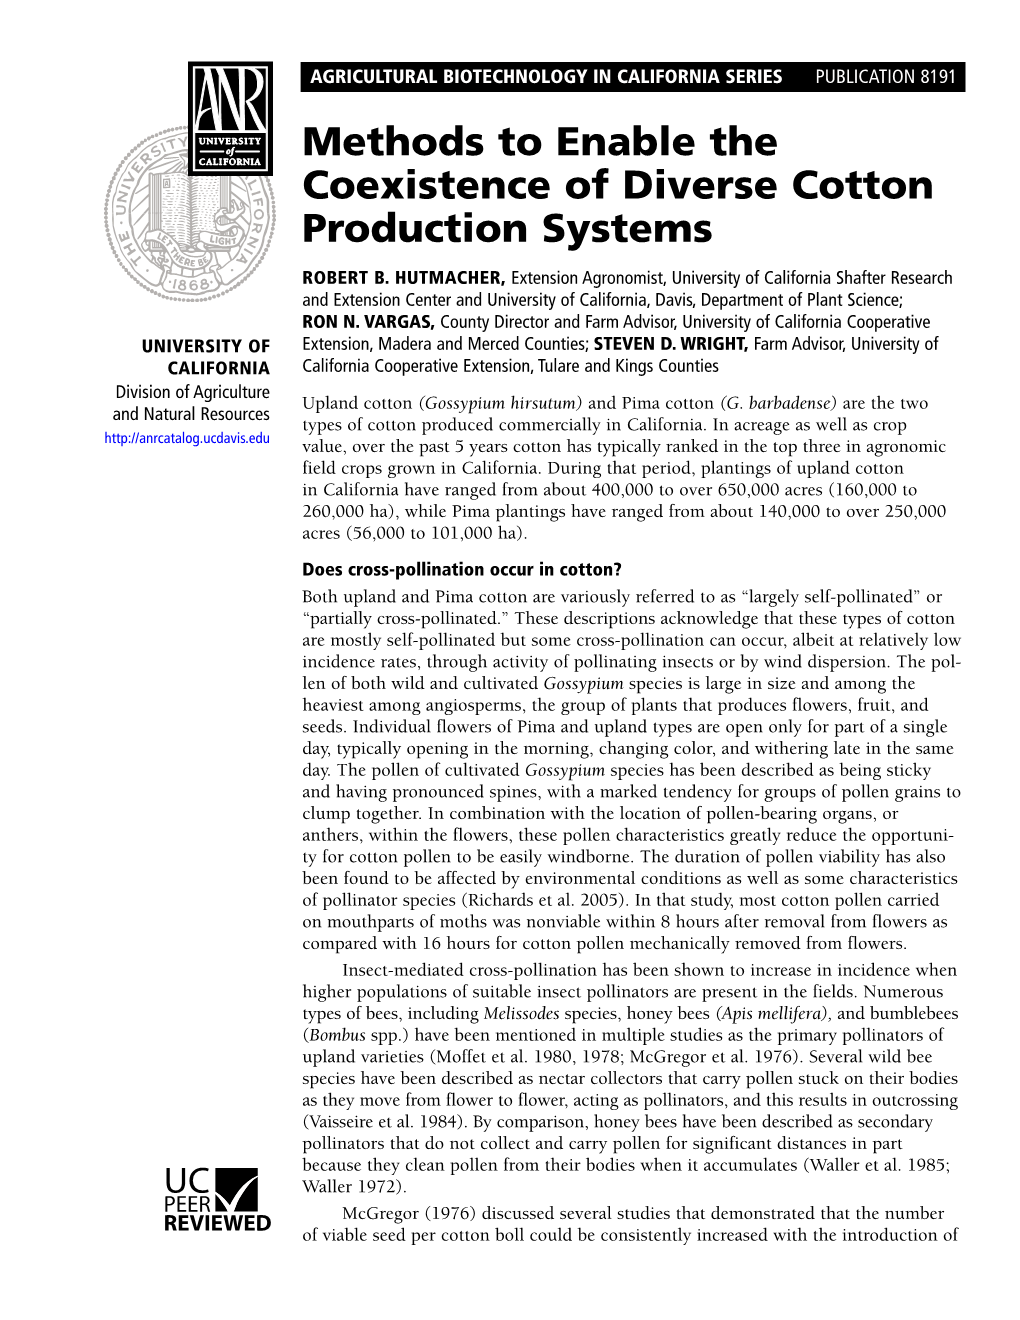 Methods to Enable the Coexistence of Diverse Cotton Production Systems